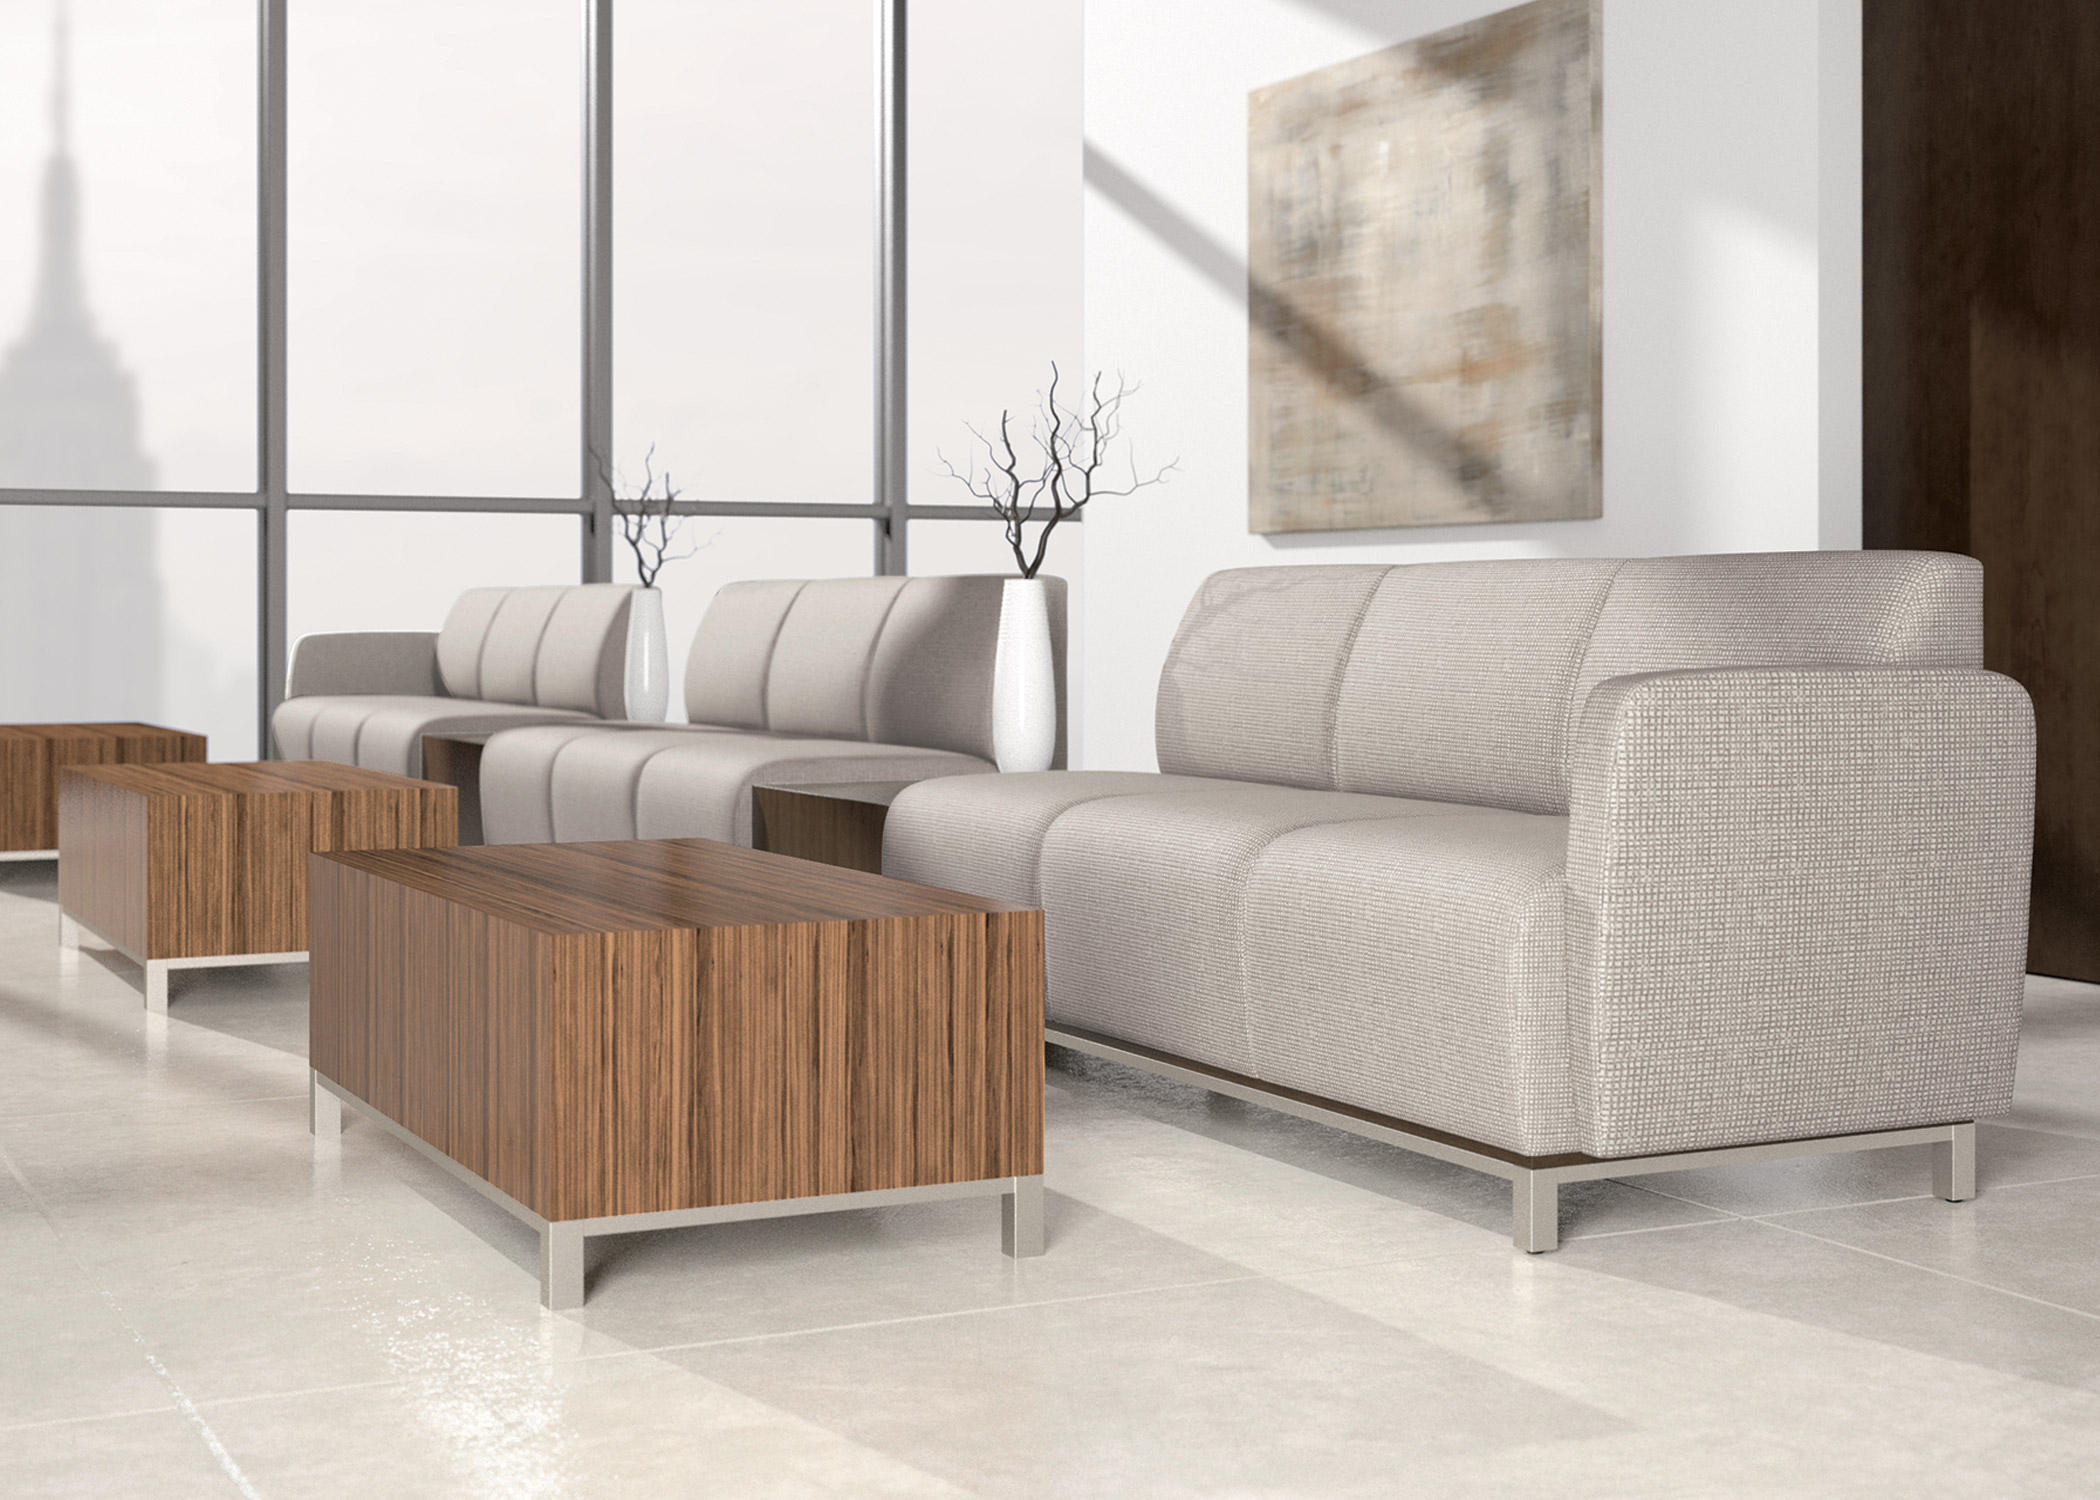 SWIFT SEATING Sofas From National Office Furniture Architonic